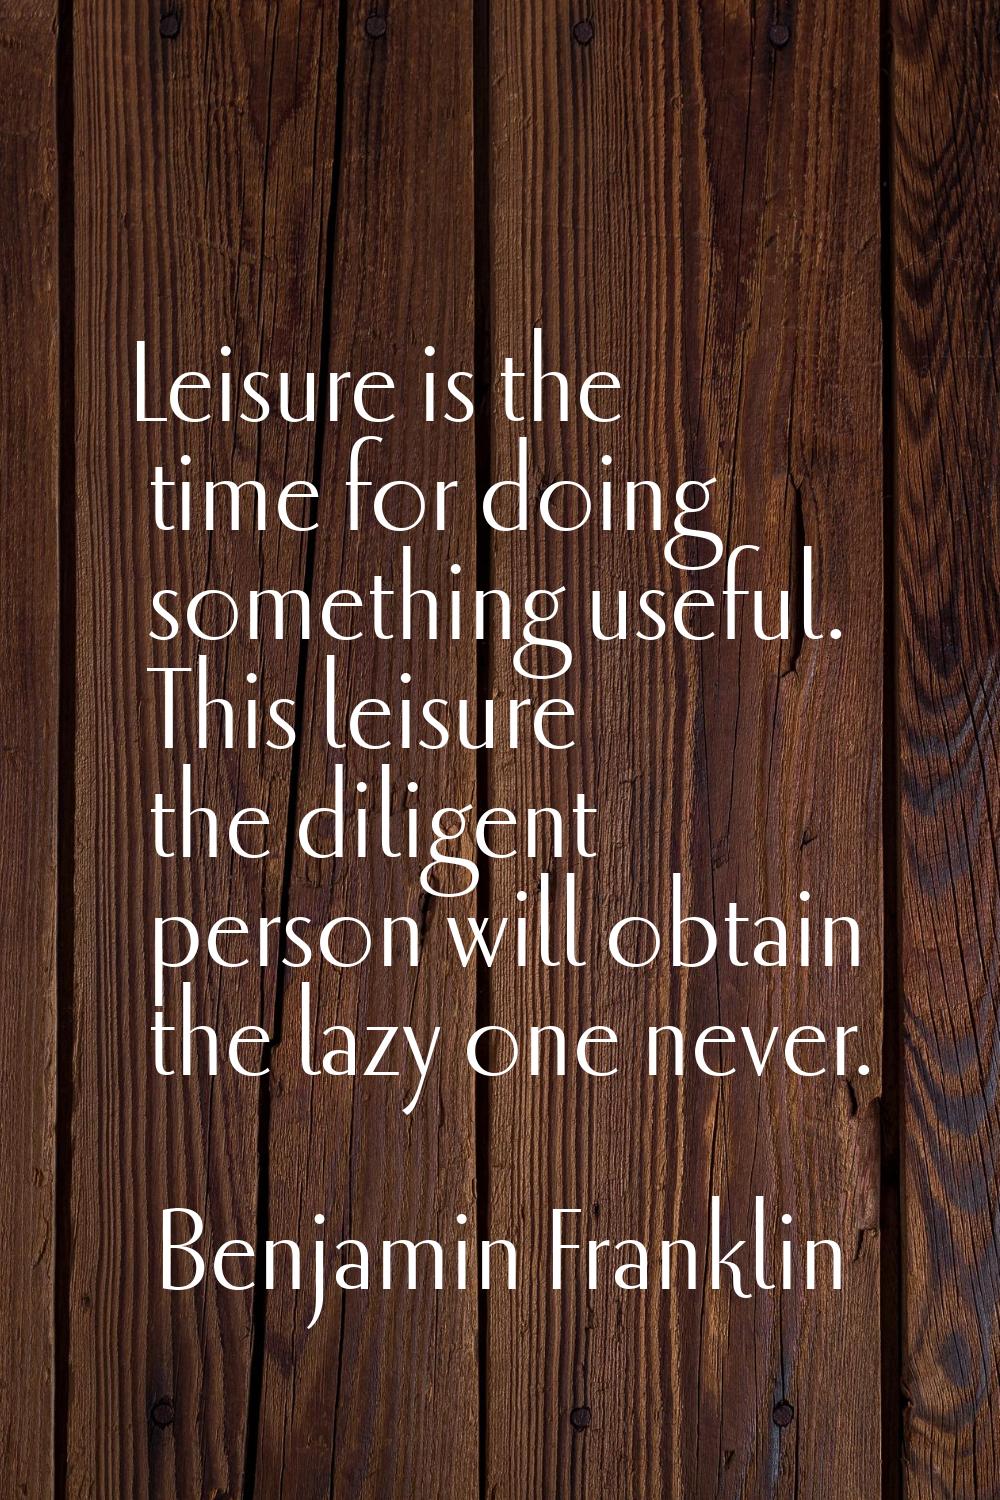 Leisure is the time for doing something useful. This leisure the diligent person will obtain the la